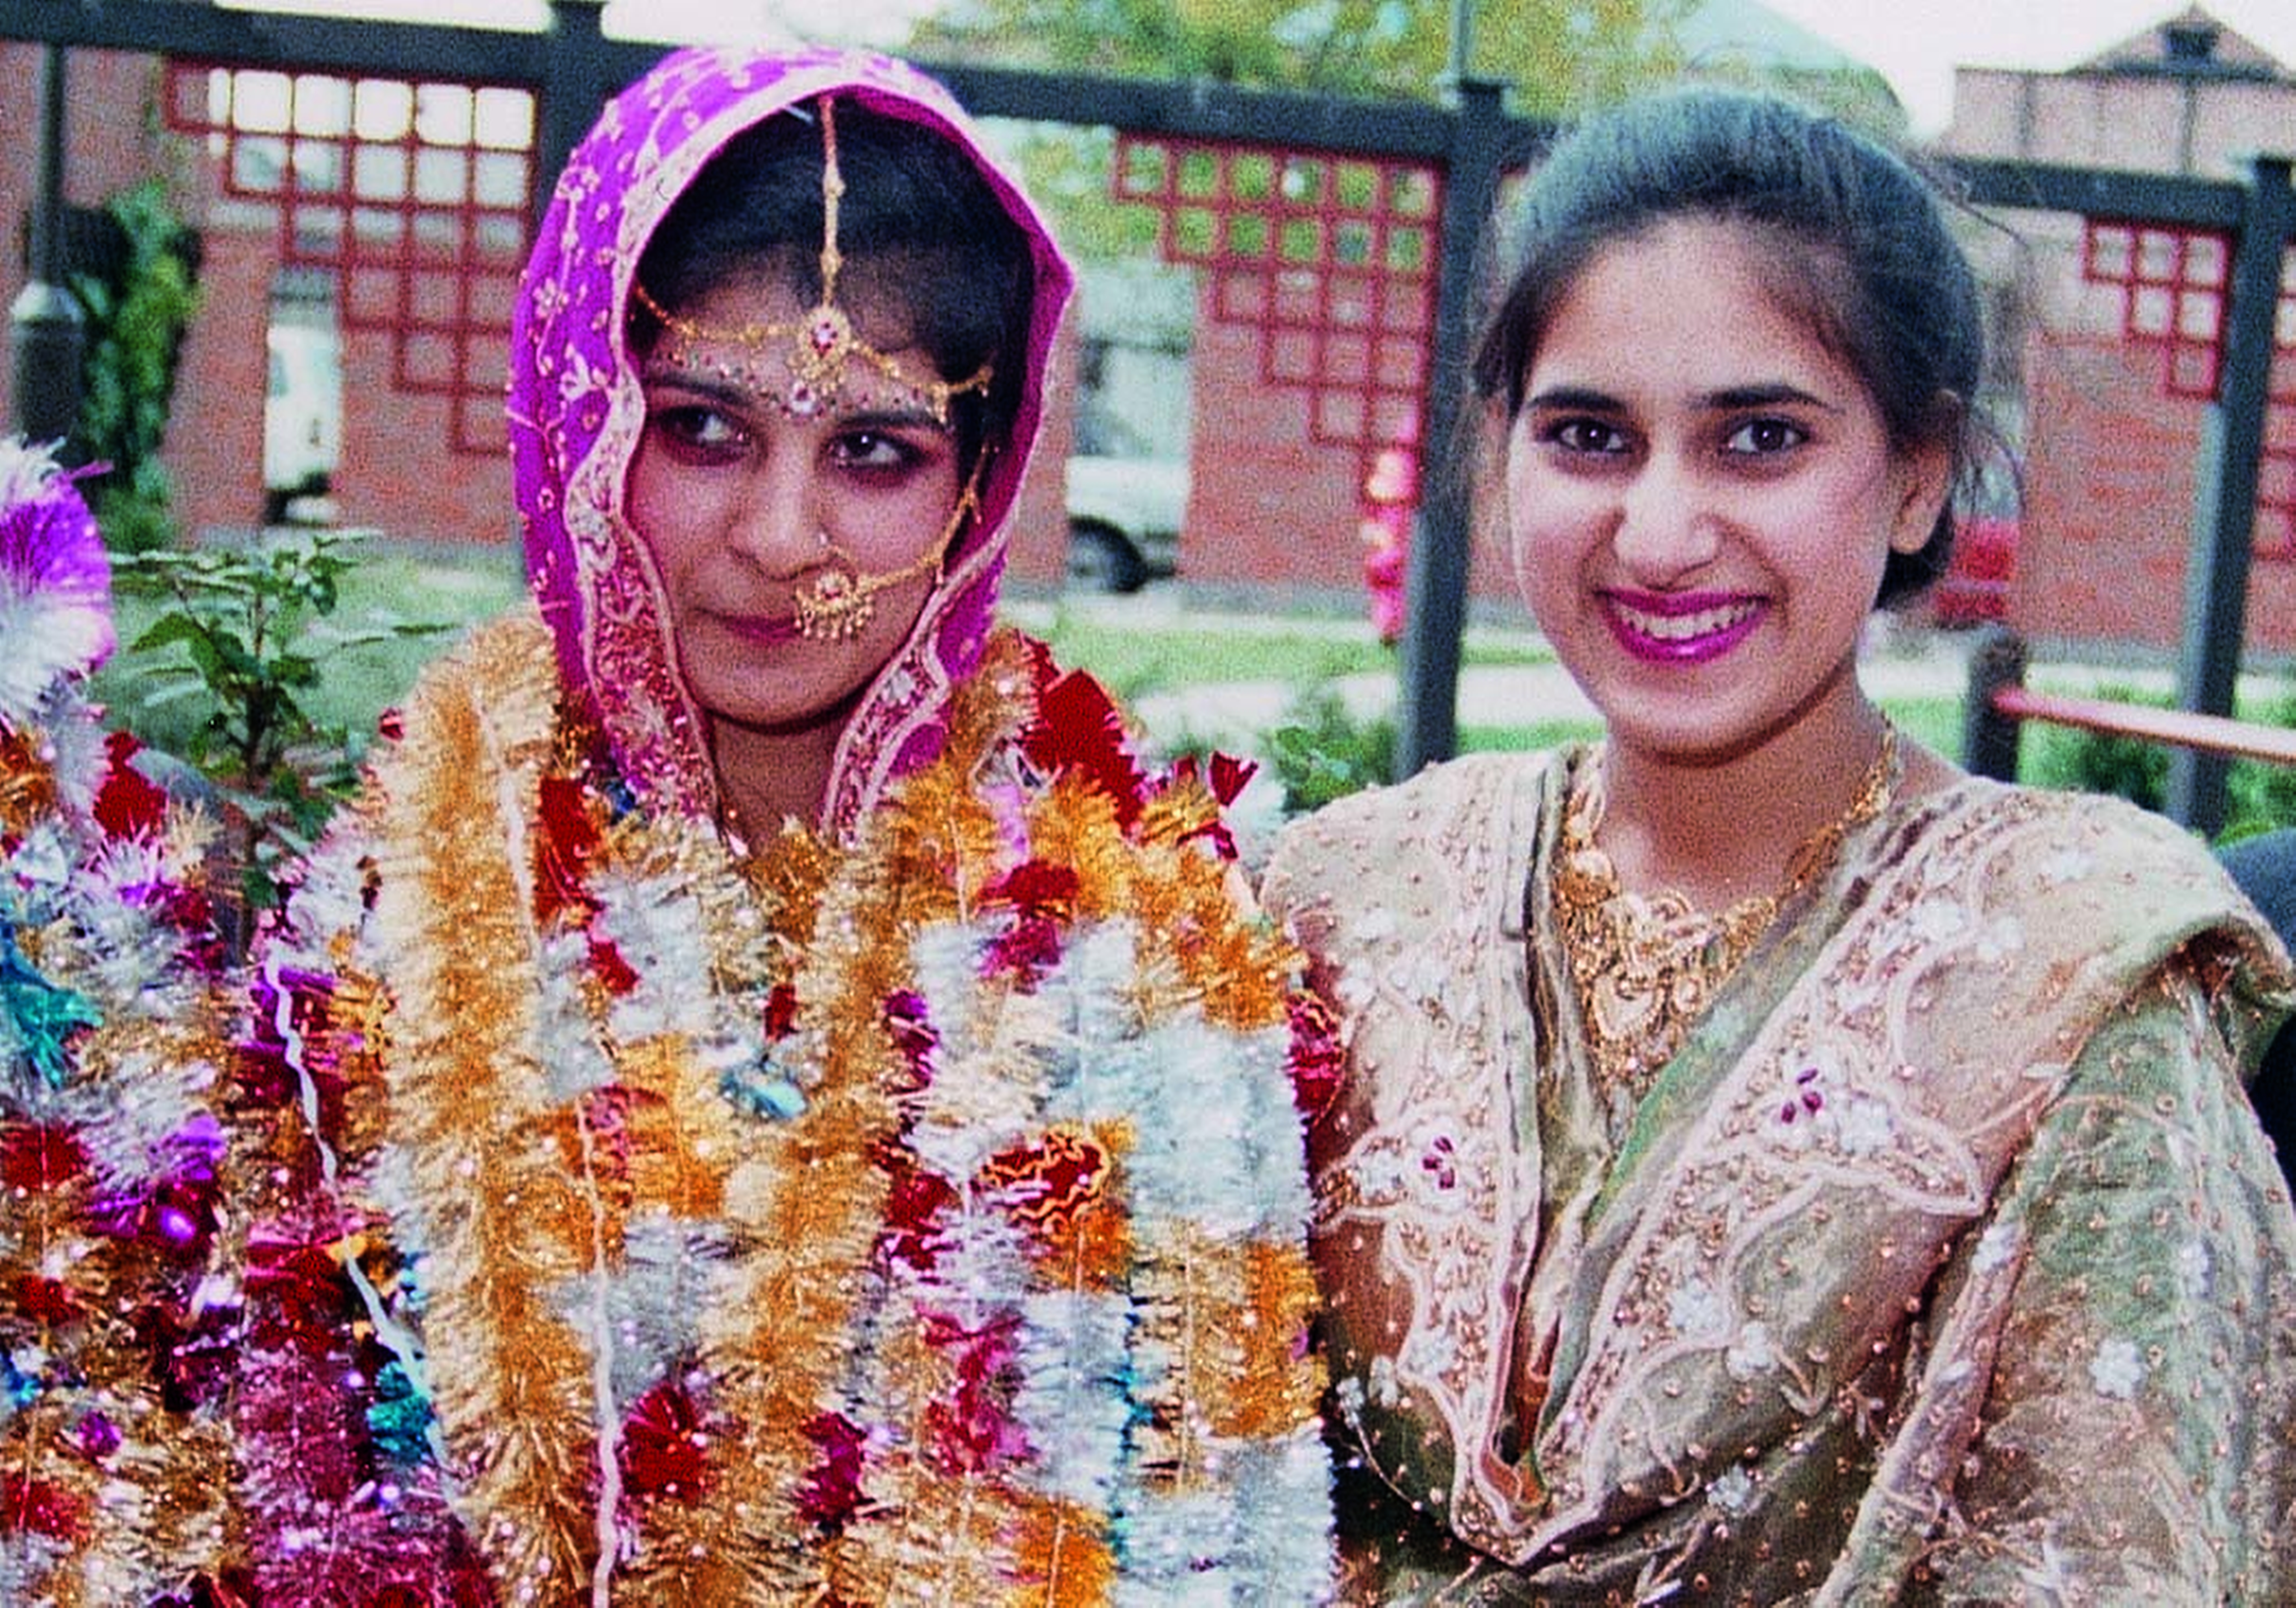 Her sister-in-law Surjit Athwal was killed at the hands of Sarbjit's former husband's family